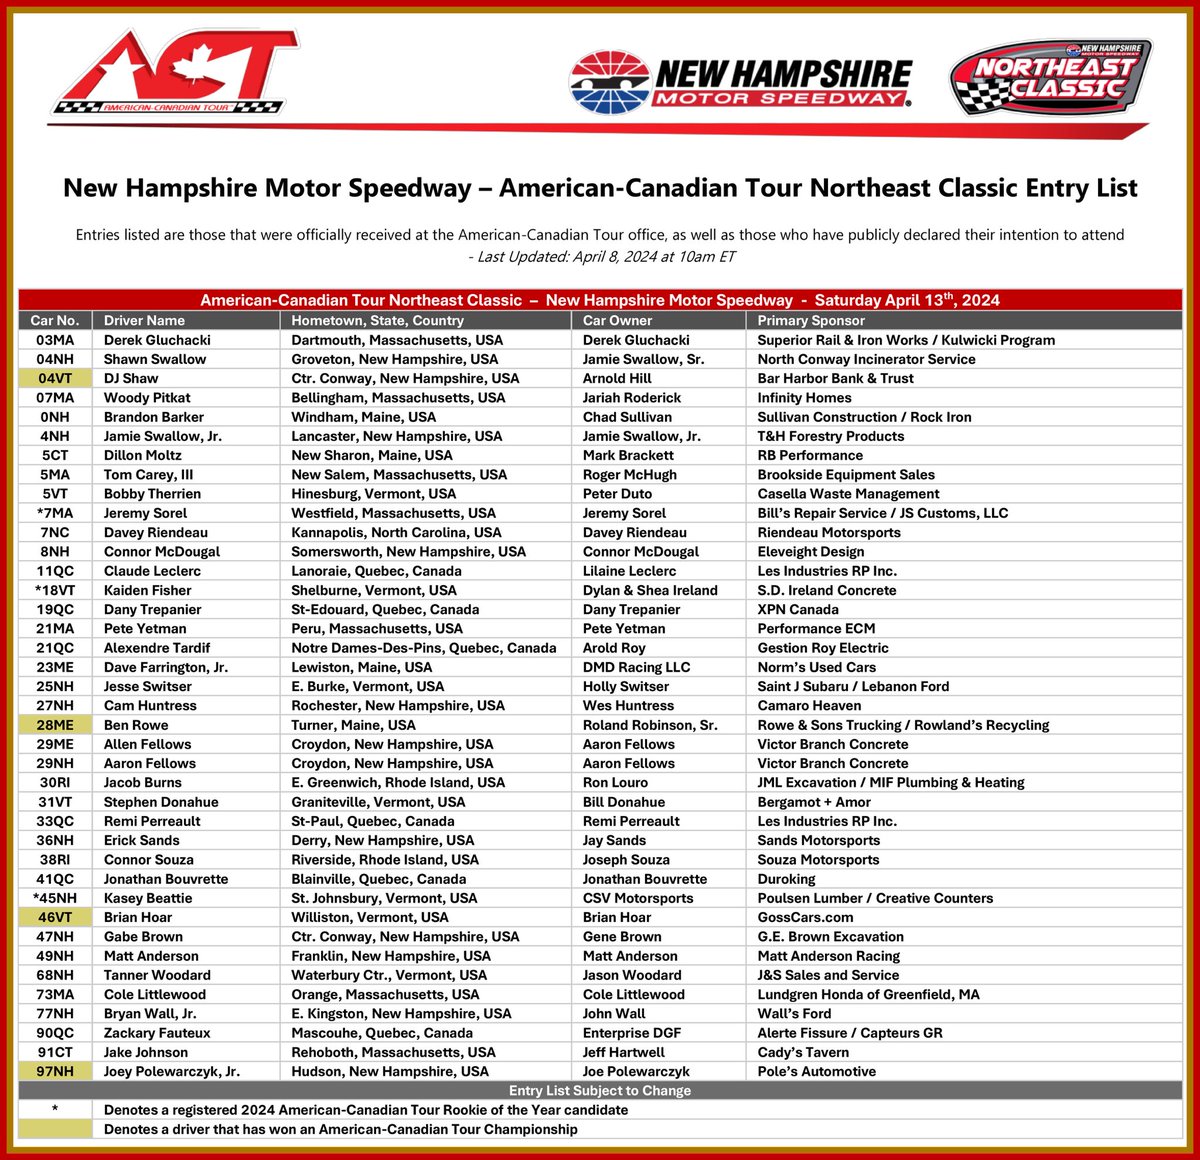 Entry list for Race No. 1 of the 2024 American-Canadian Tour Championship Season! 🔴 The 4th annual Northeast Classic at New Hampshire Motor Speedway - April 12-13, 2024 Full event details can be found here: acttour.com/actusschedule @RacingAmerica